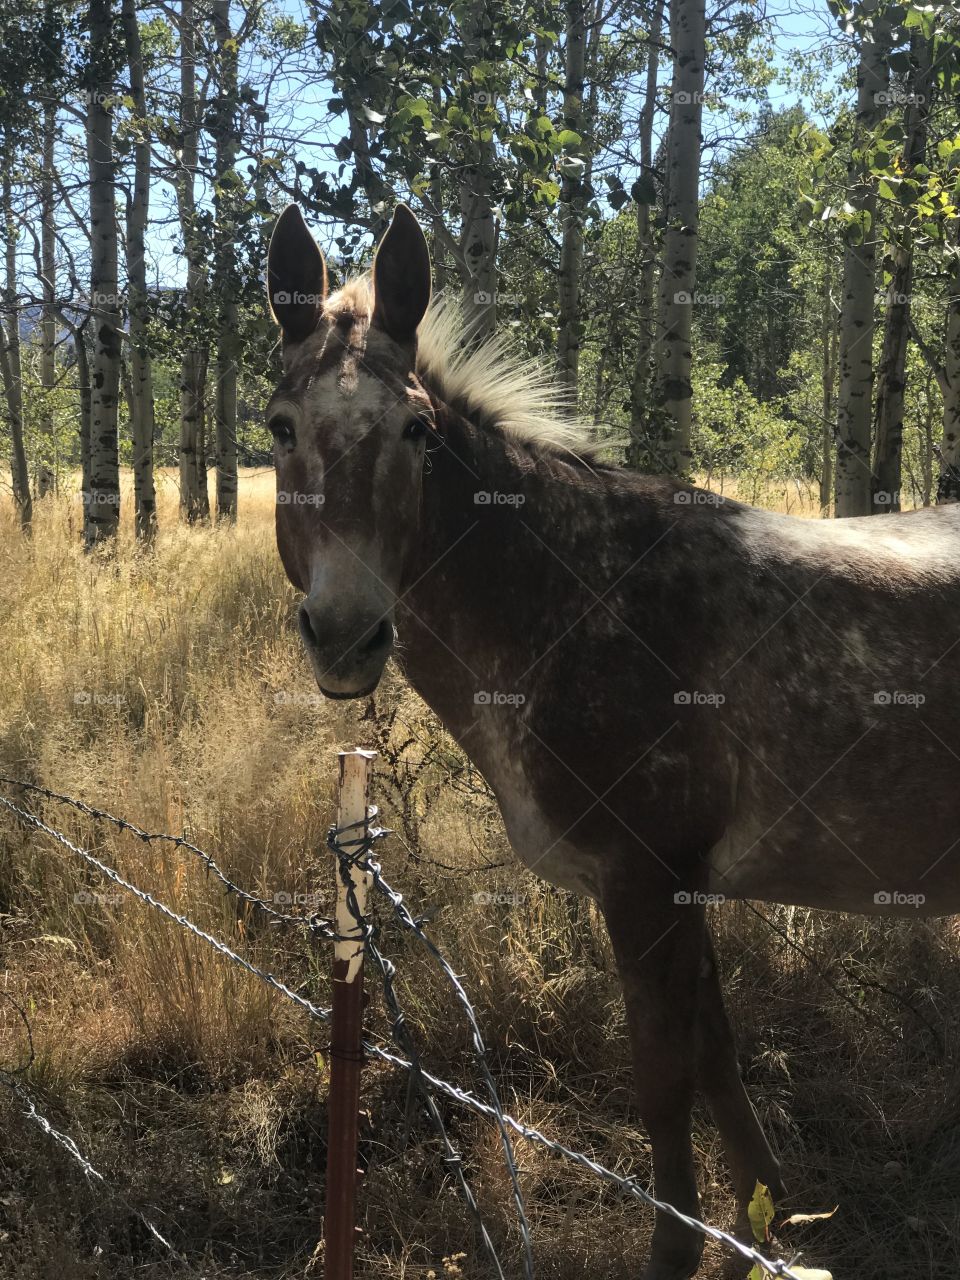 An inquiring mule from a nearby ranch, free to graze between birch trees by the lake. 